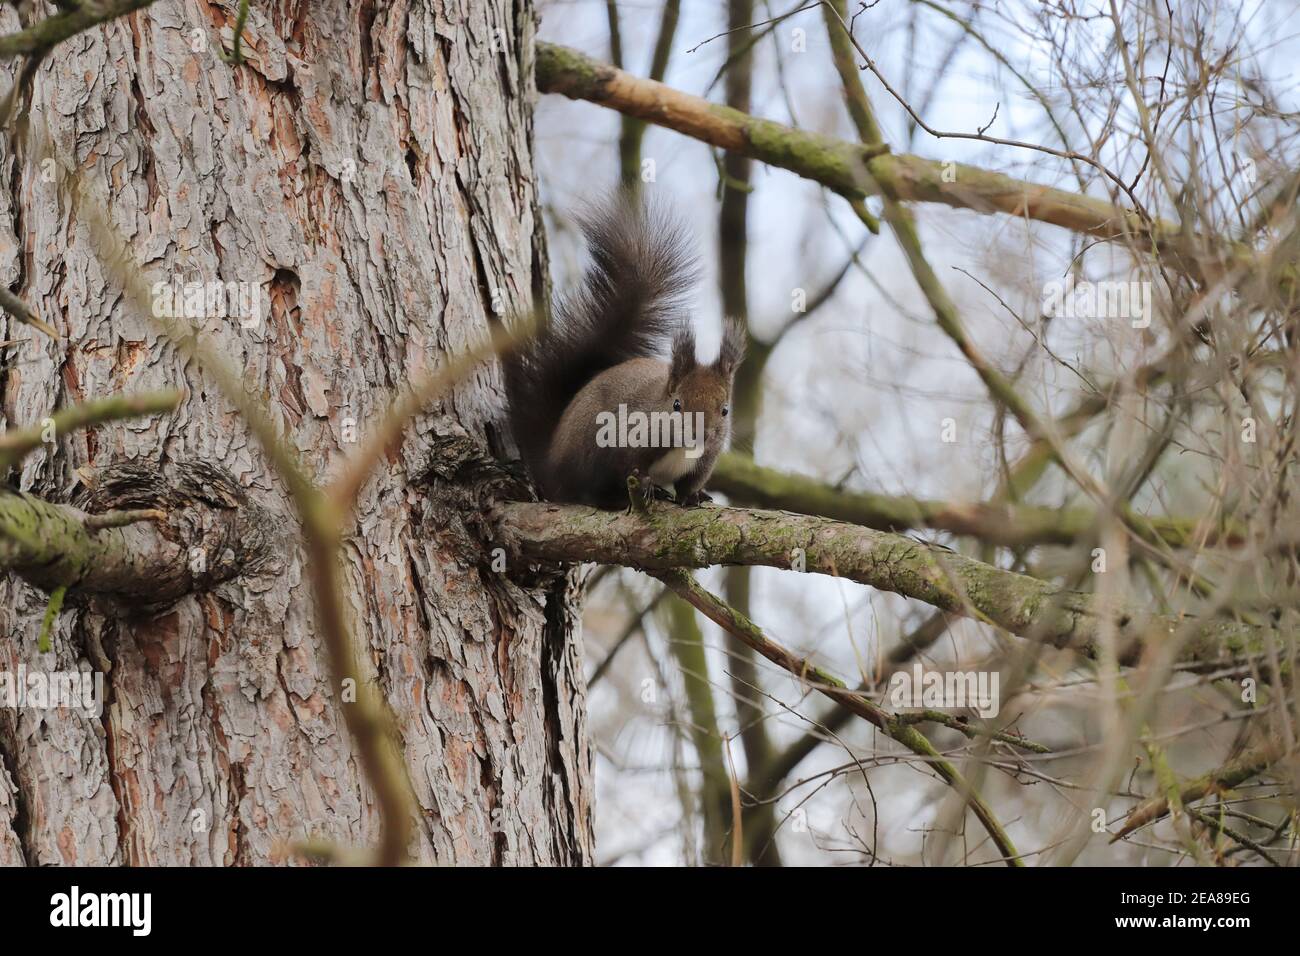 Squirrel stands on a tree branch Stock Photo